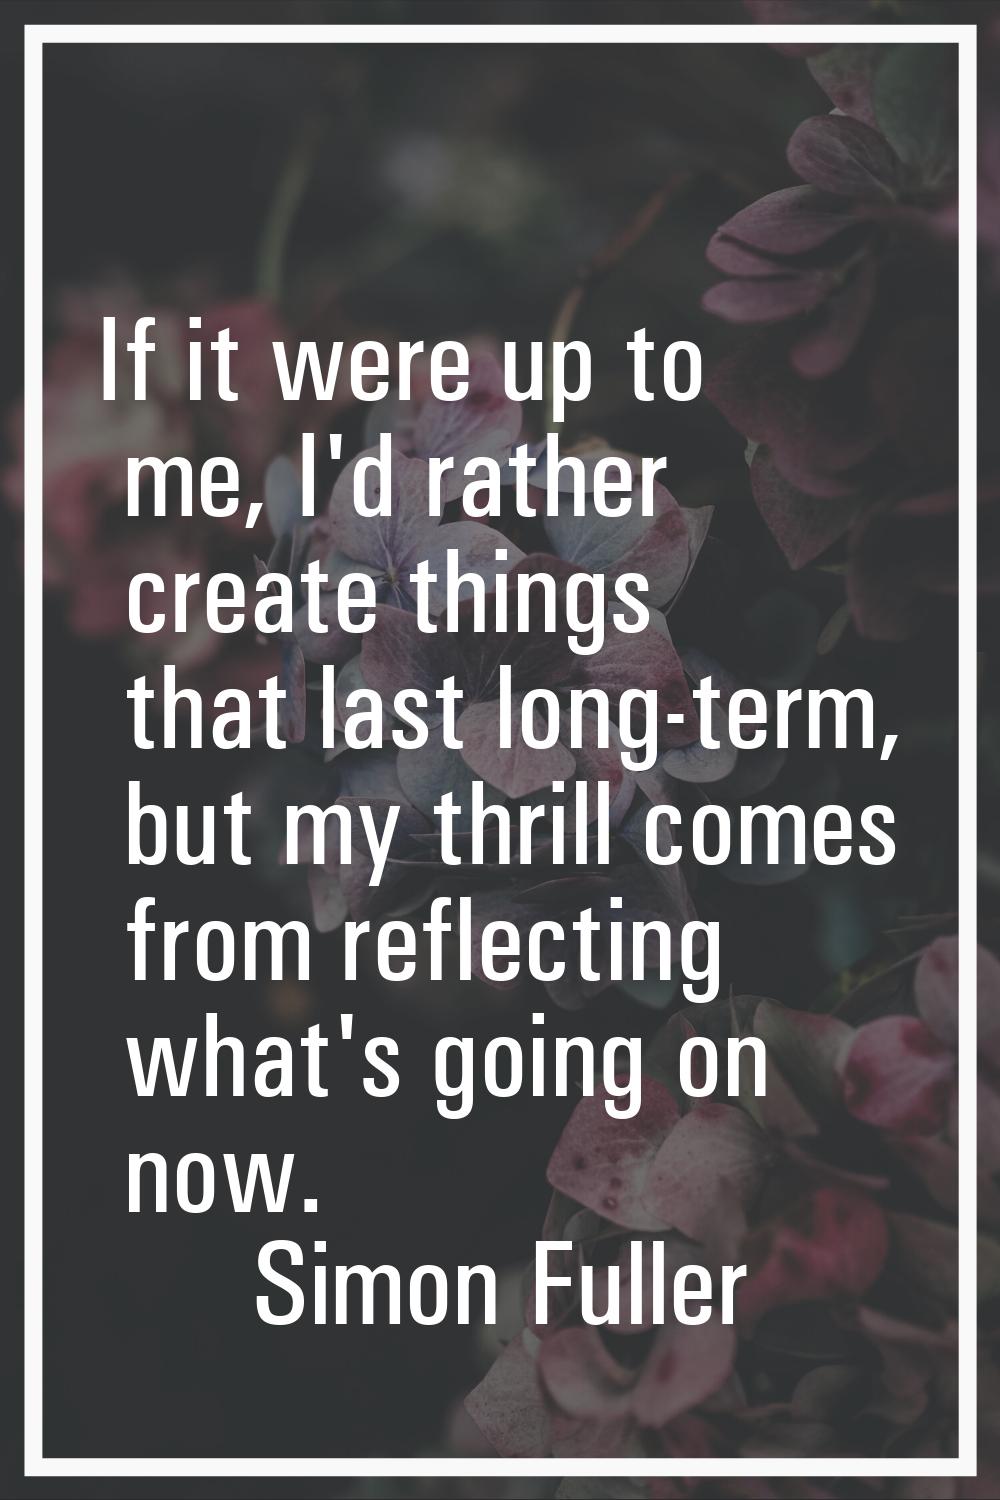 If it were up to me, I'd rather create things that last long-term, but my thrill comes from reflect